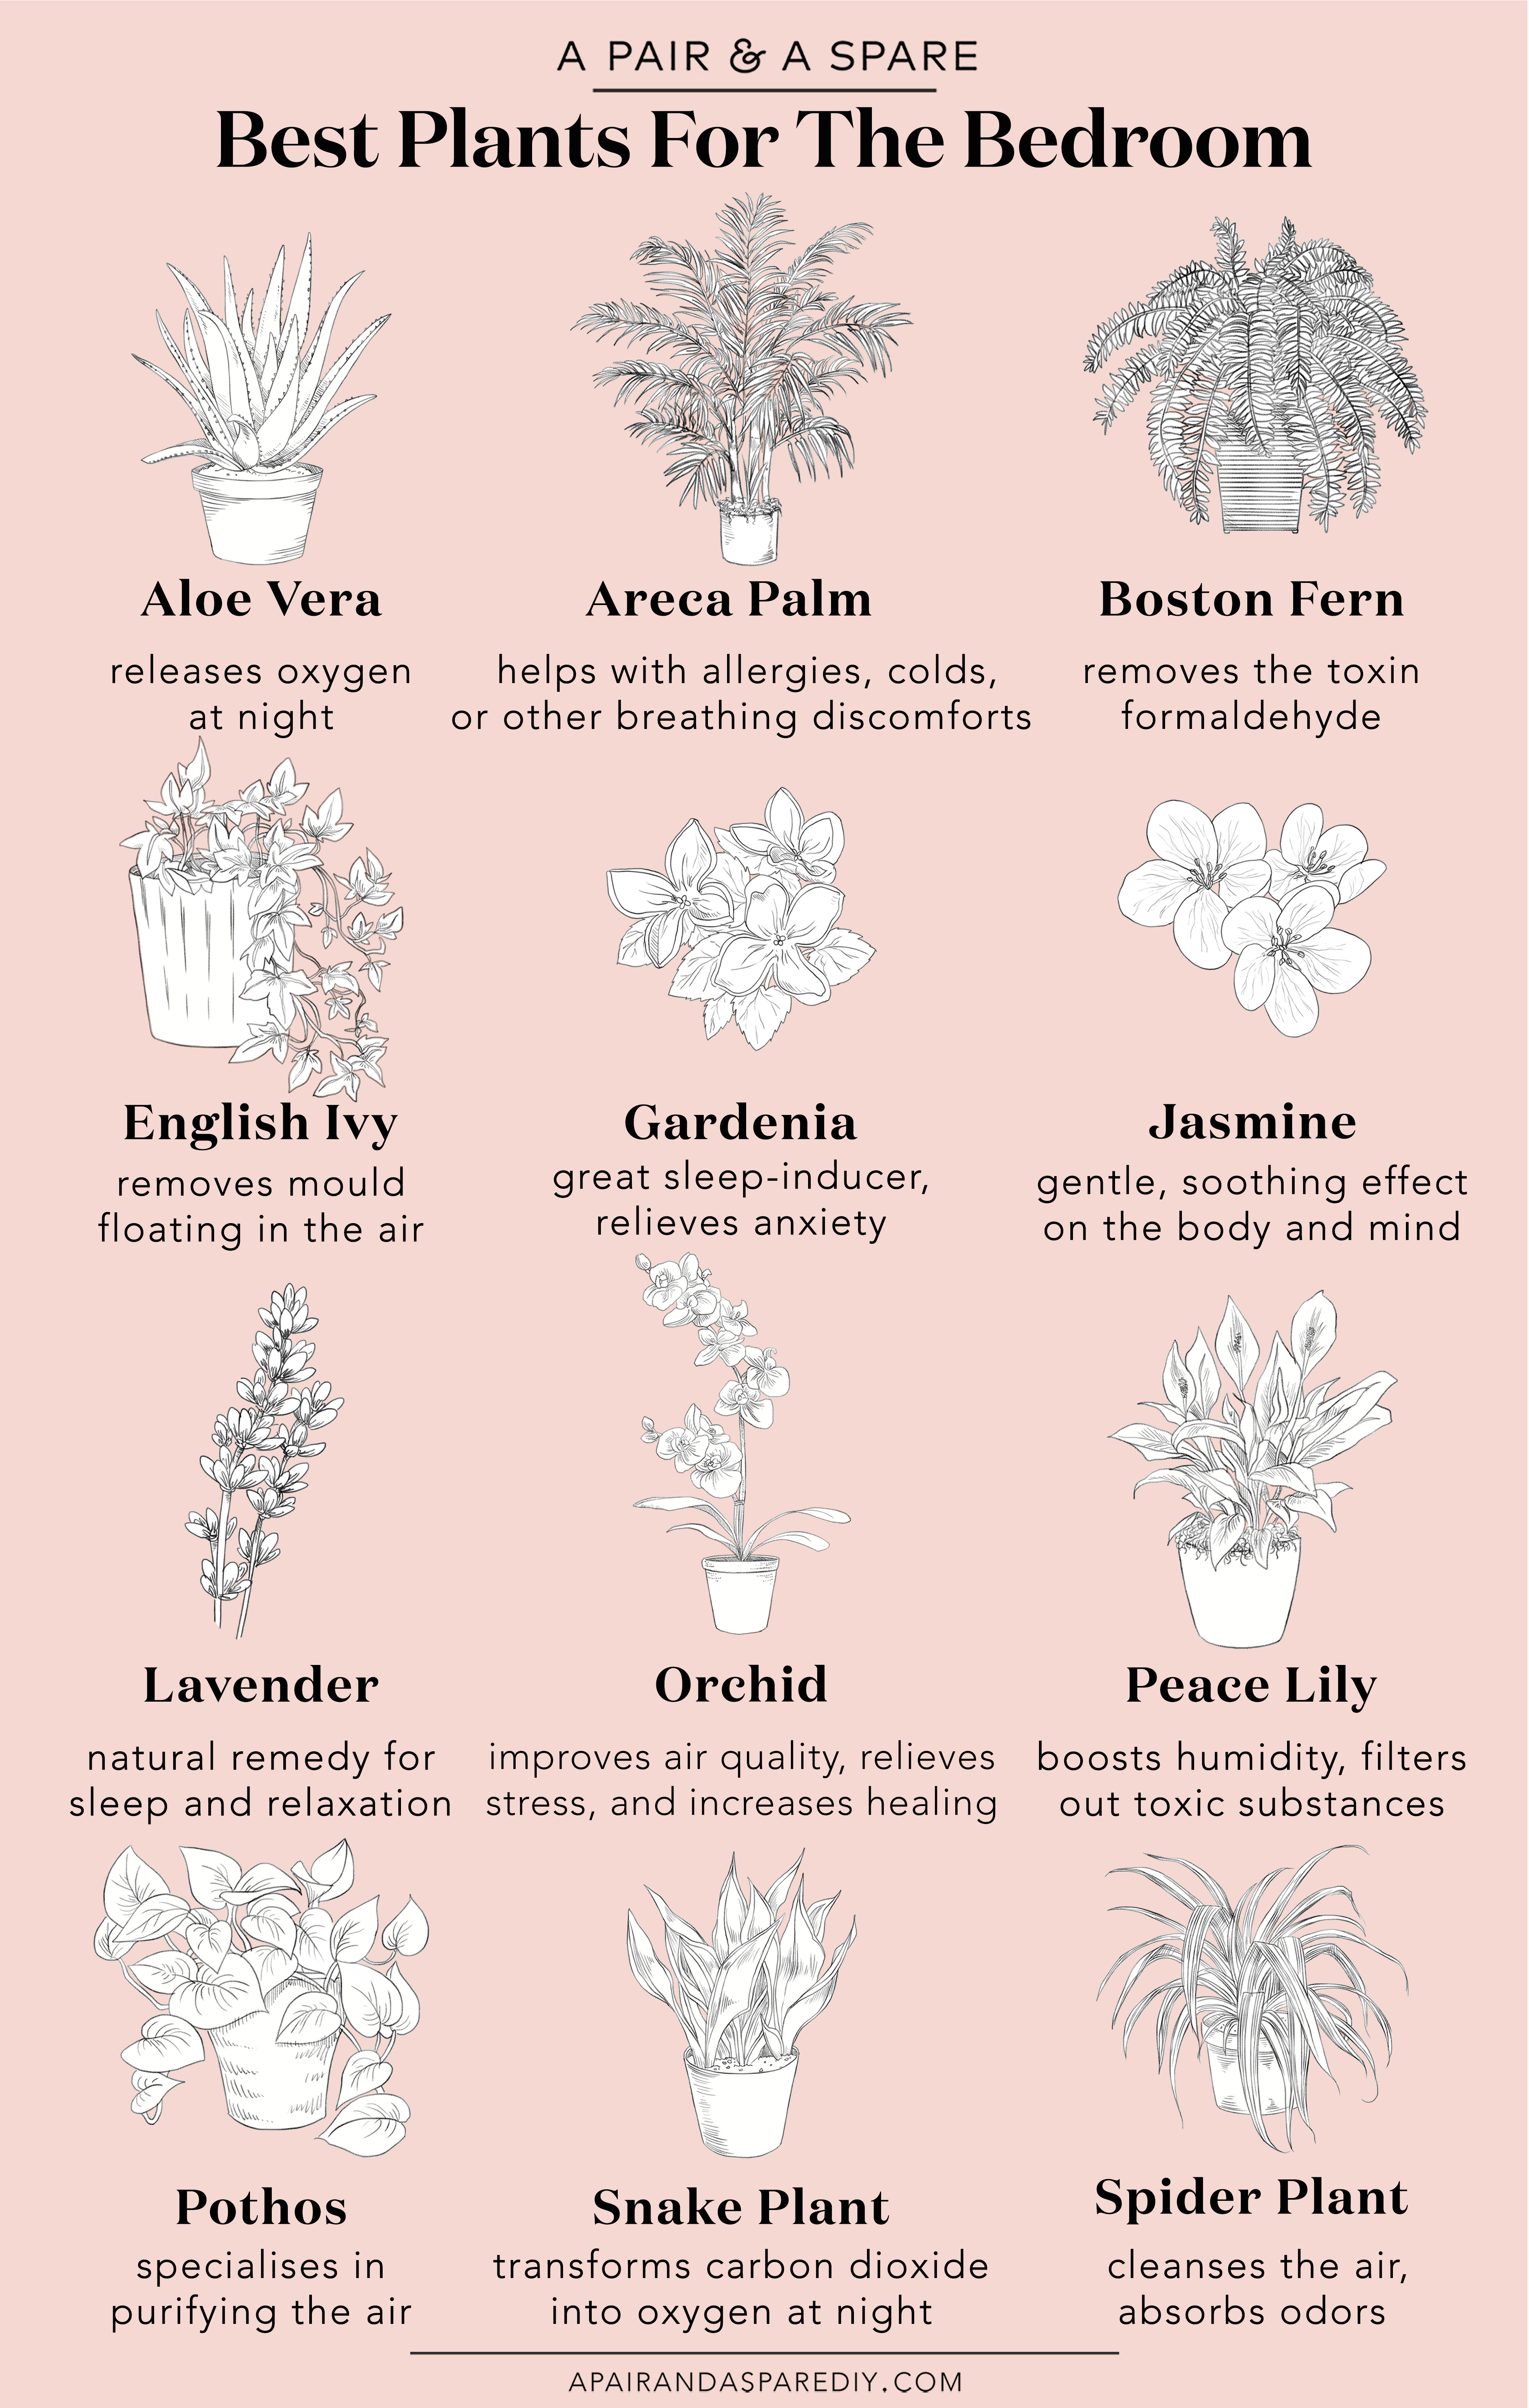 These are the plants you should have in your room